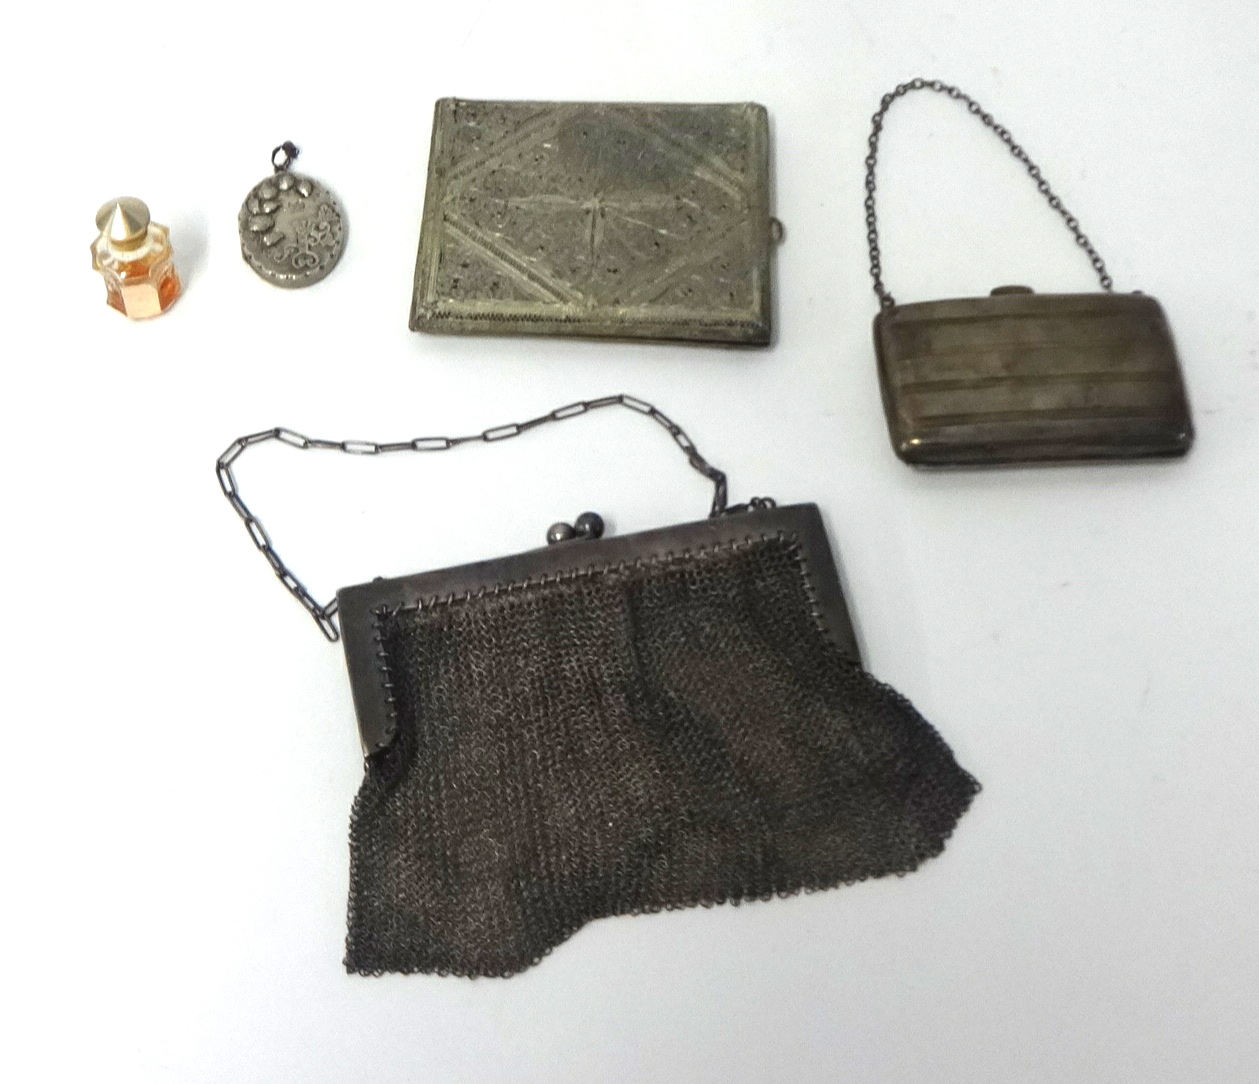 A small silver bag, an evening 'chain mail' bag, locket and miniature scent bottle.